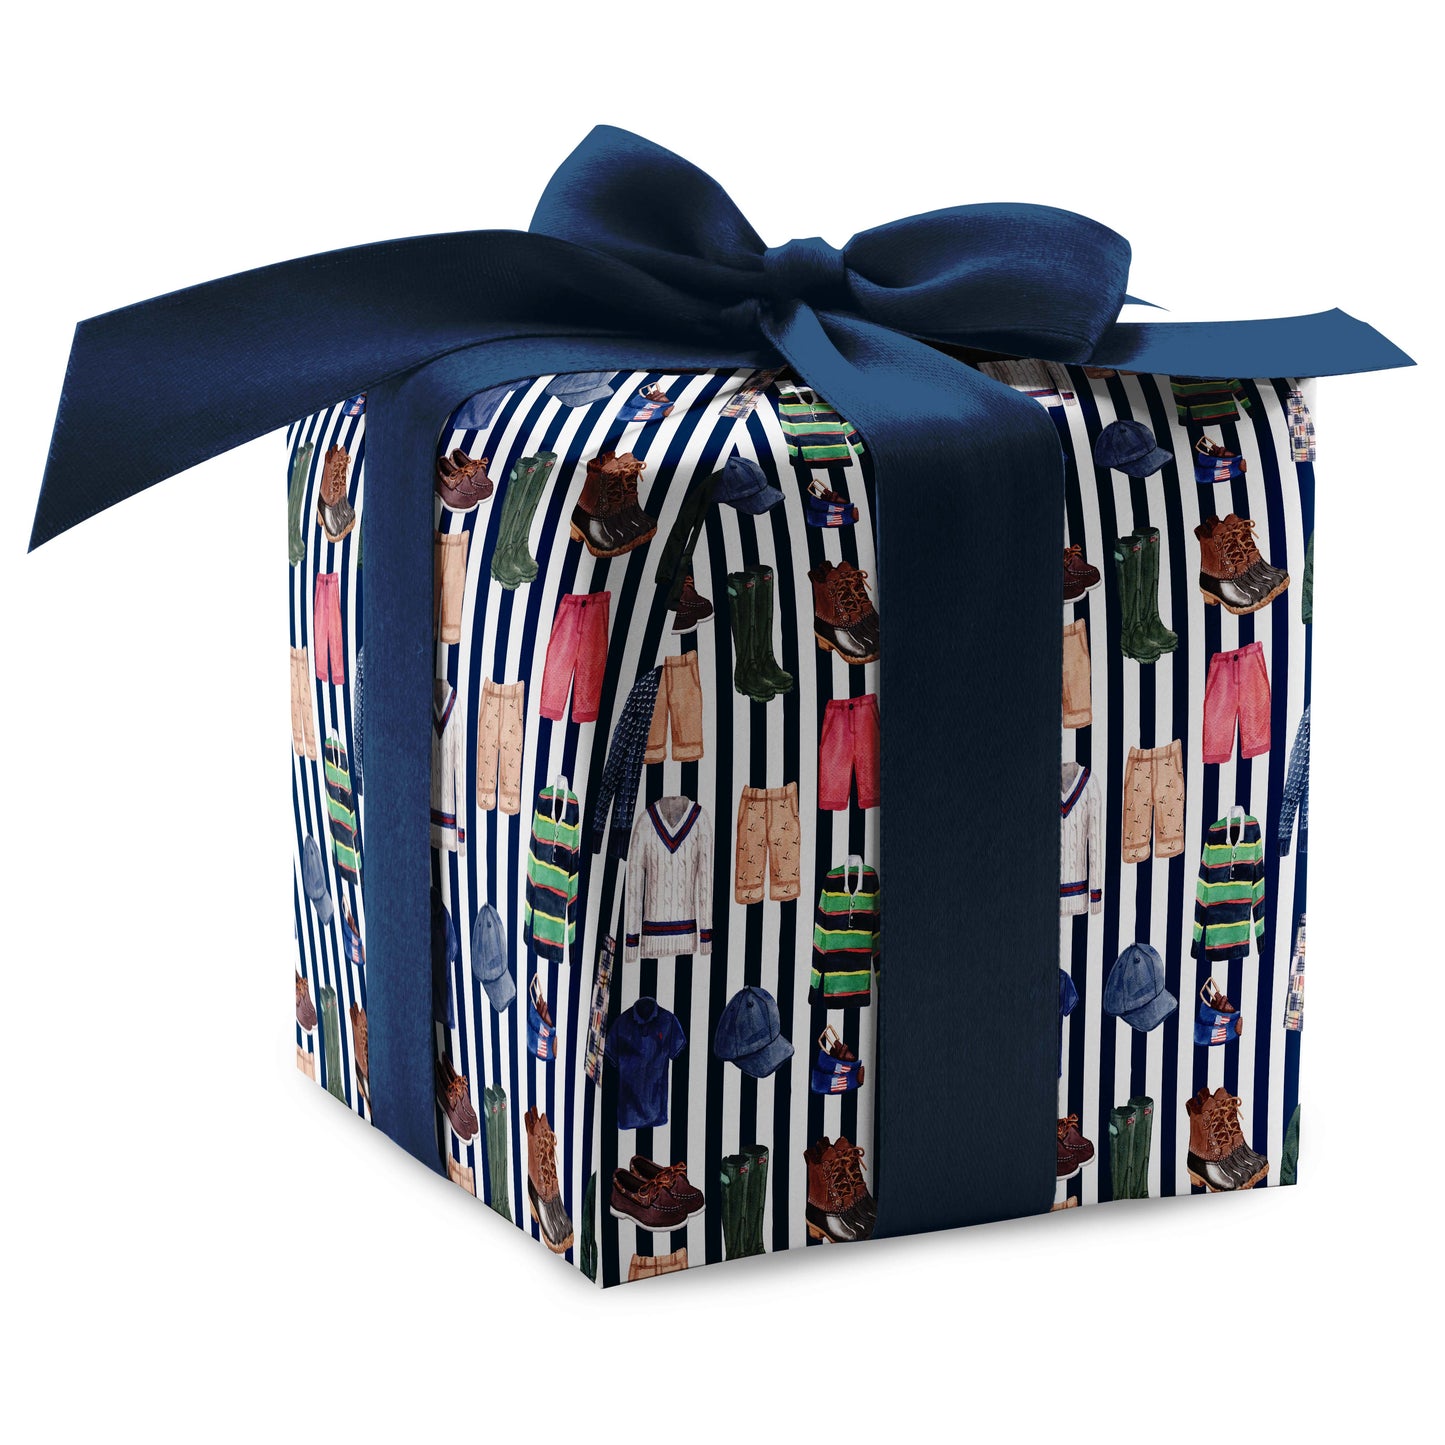 Harvard Yard Boy's Luxury Gift Wrap - Available in 3 Colors